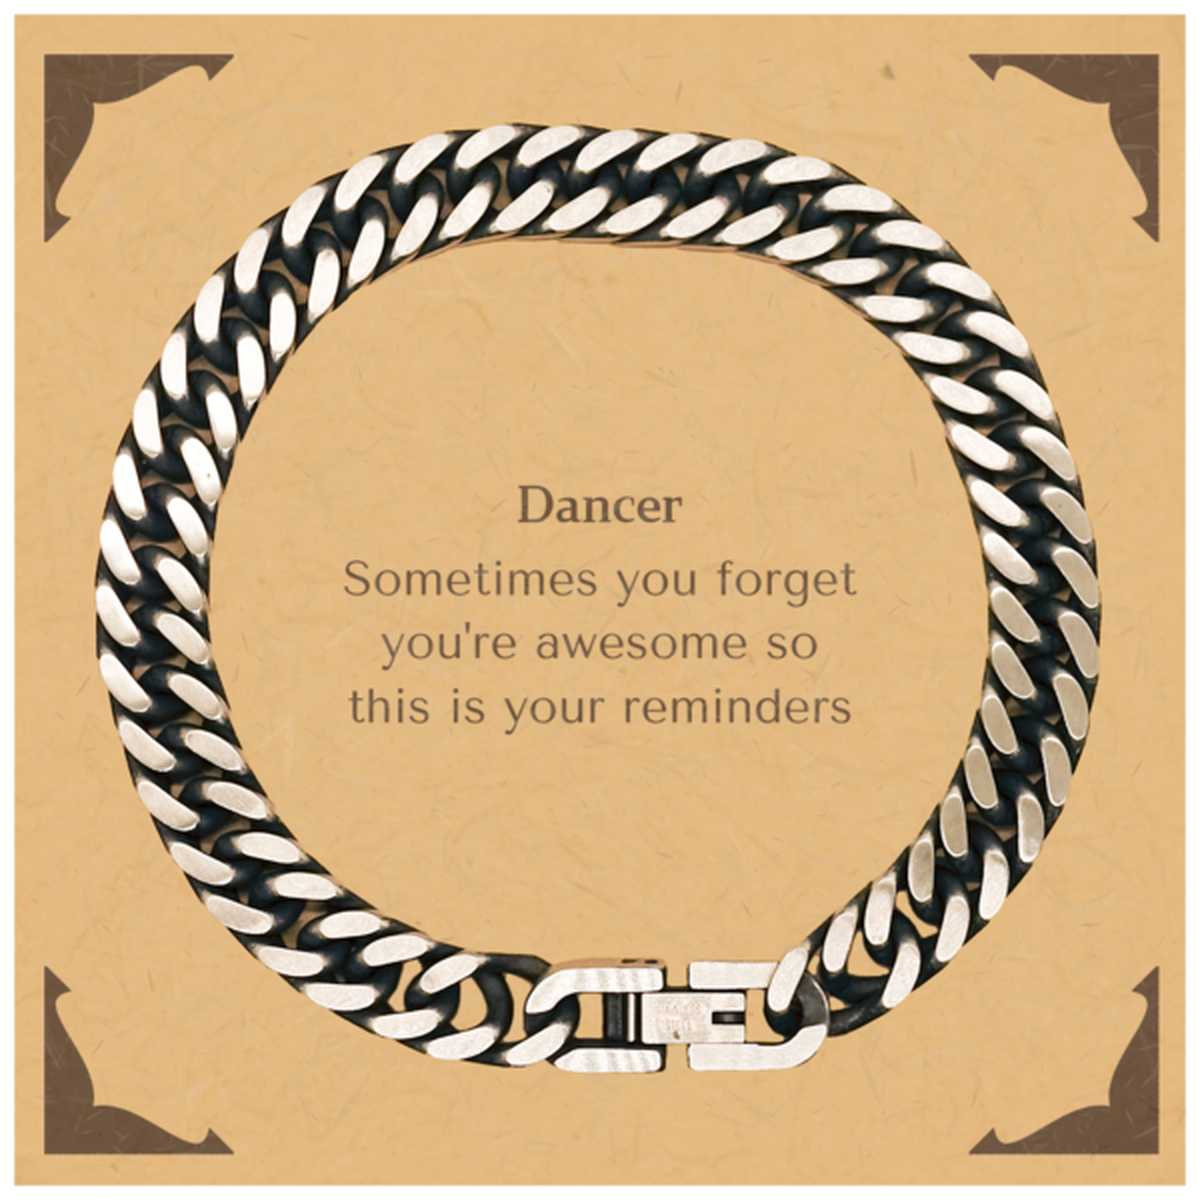 Sentimental Dancer Cuban Link Chain Bracelet, Dancer Sometimes you forget you're awesome so this is your reminders, Graduation Christmas Birthday Gifts for Dancer, Men, Women, Coworkers